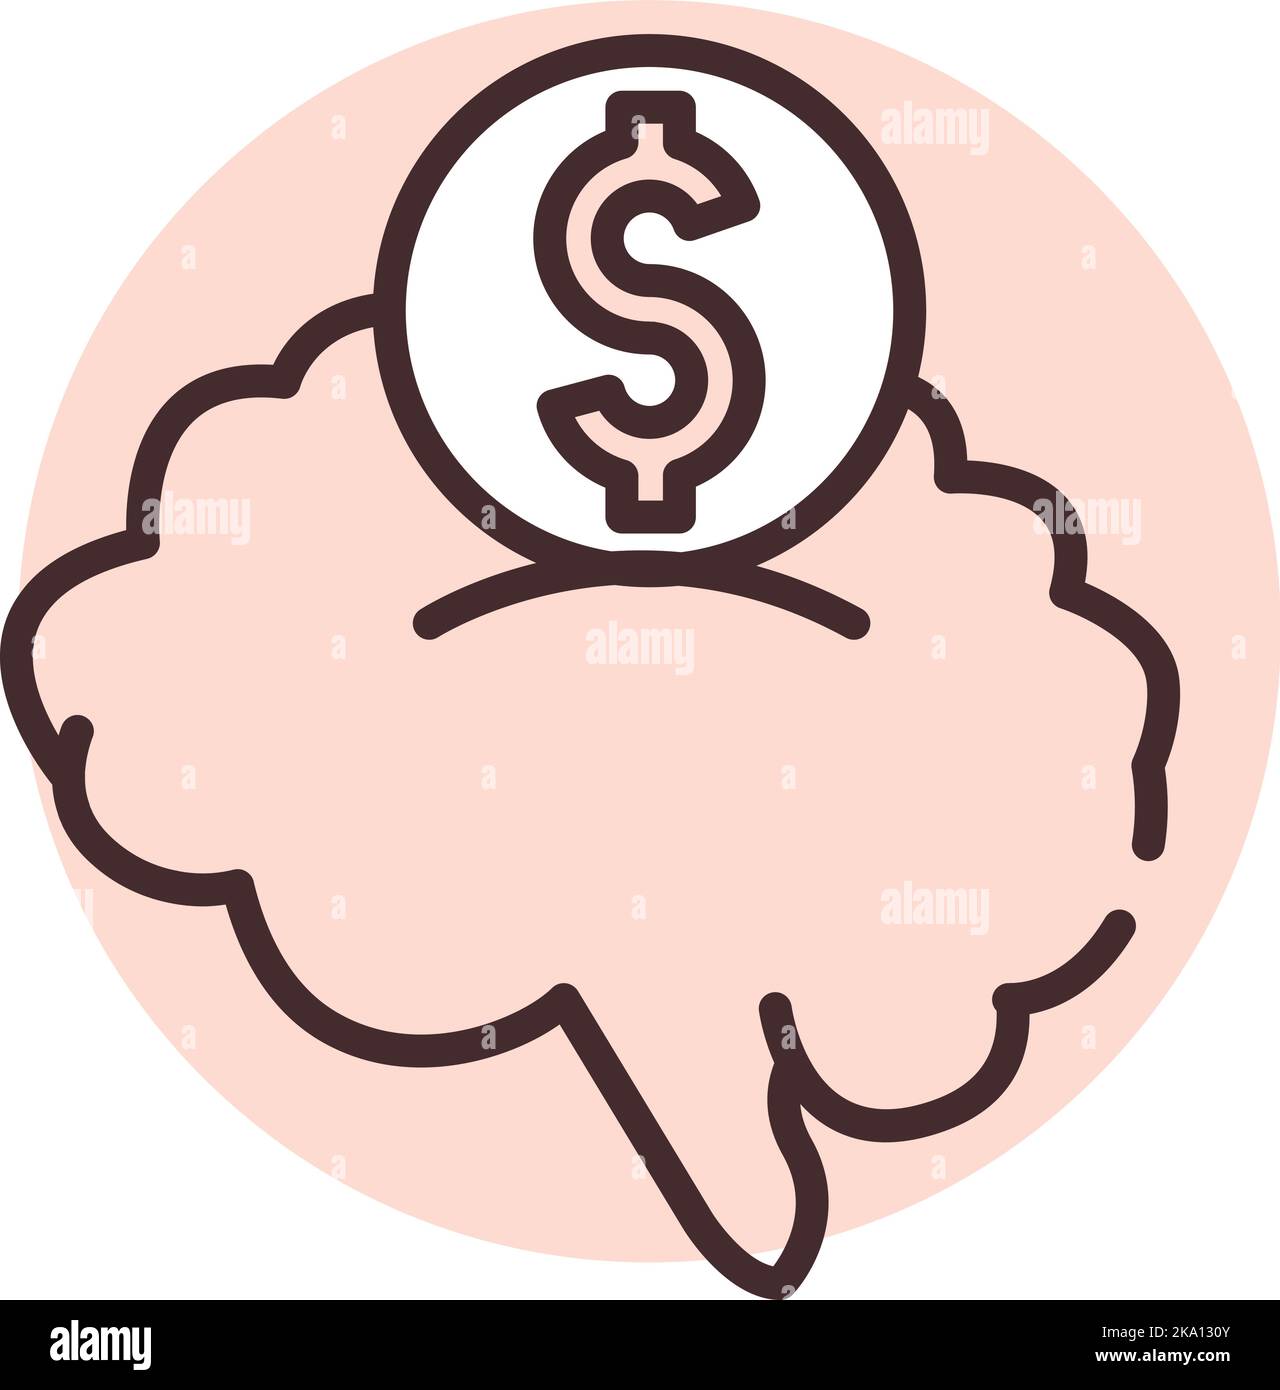 Money savings, illustration or icon, vector on white background. Stock Vector